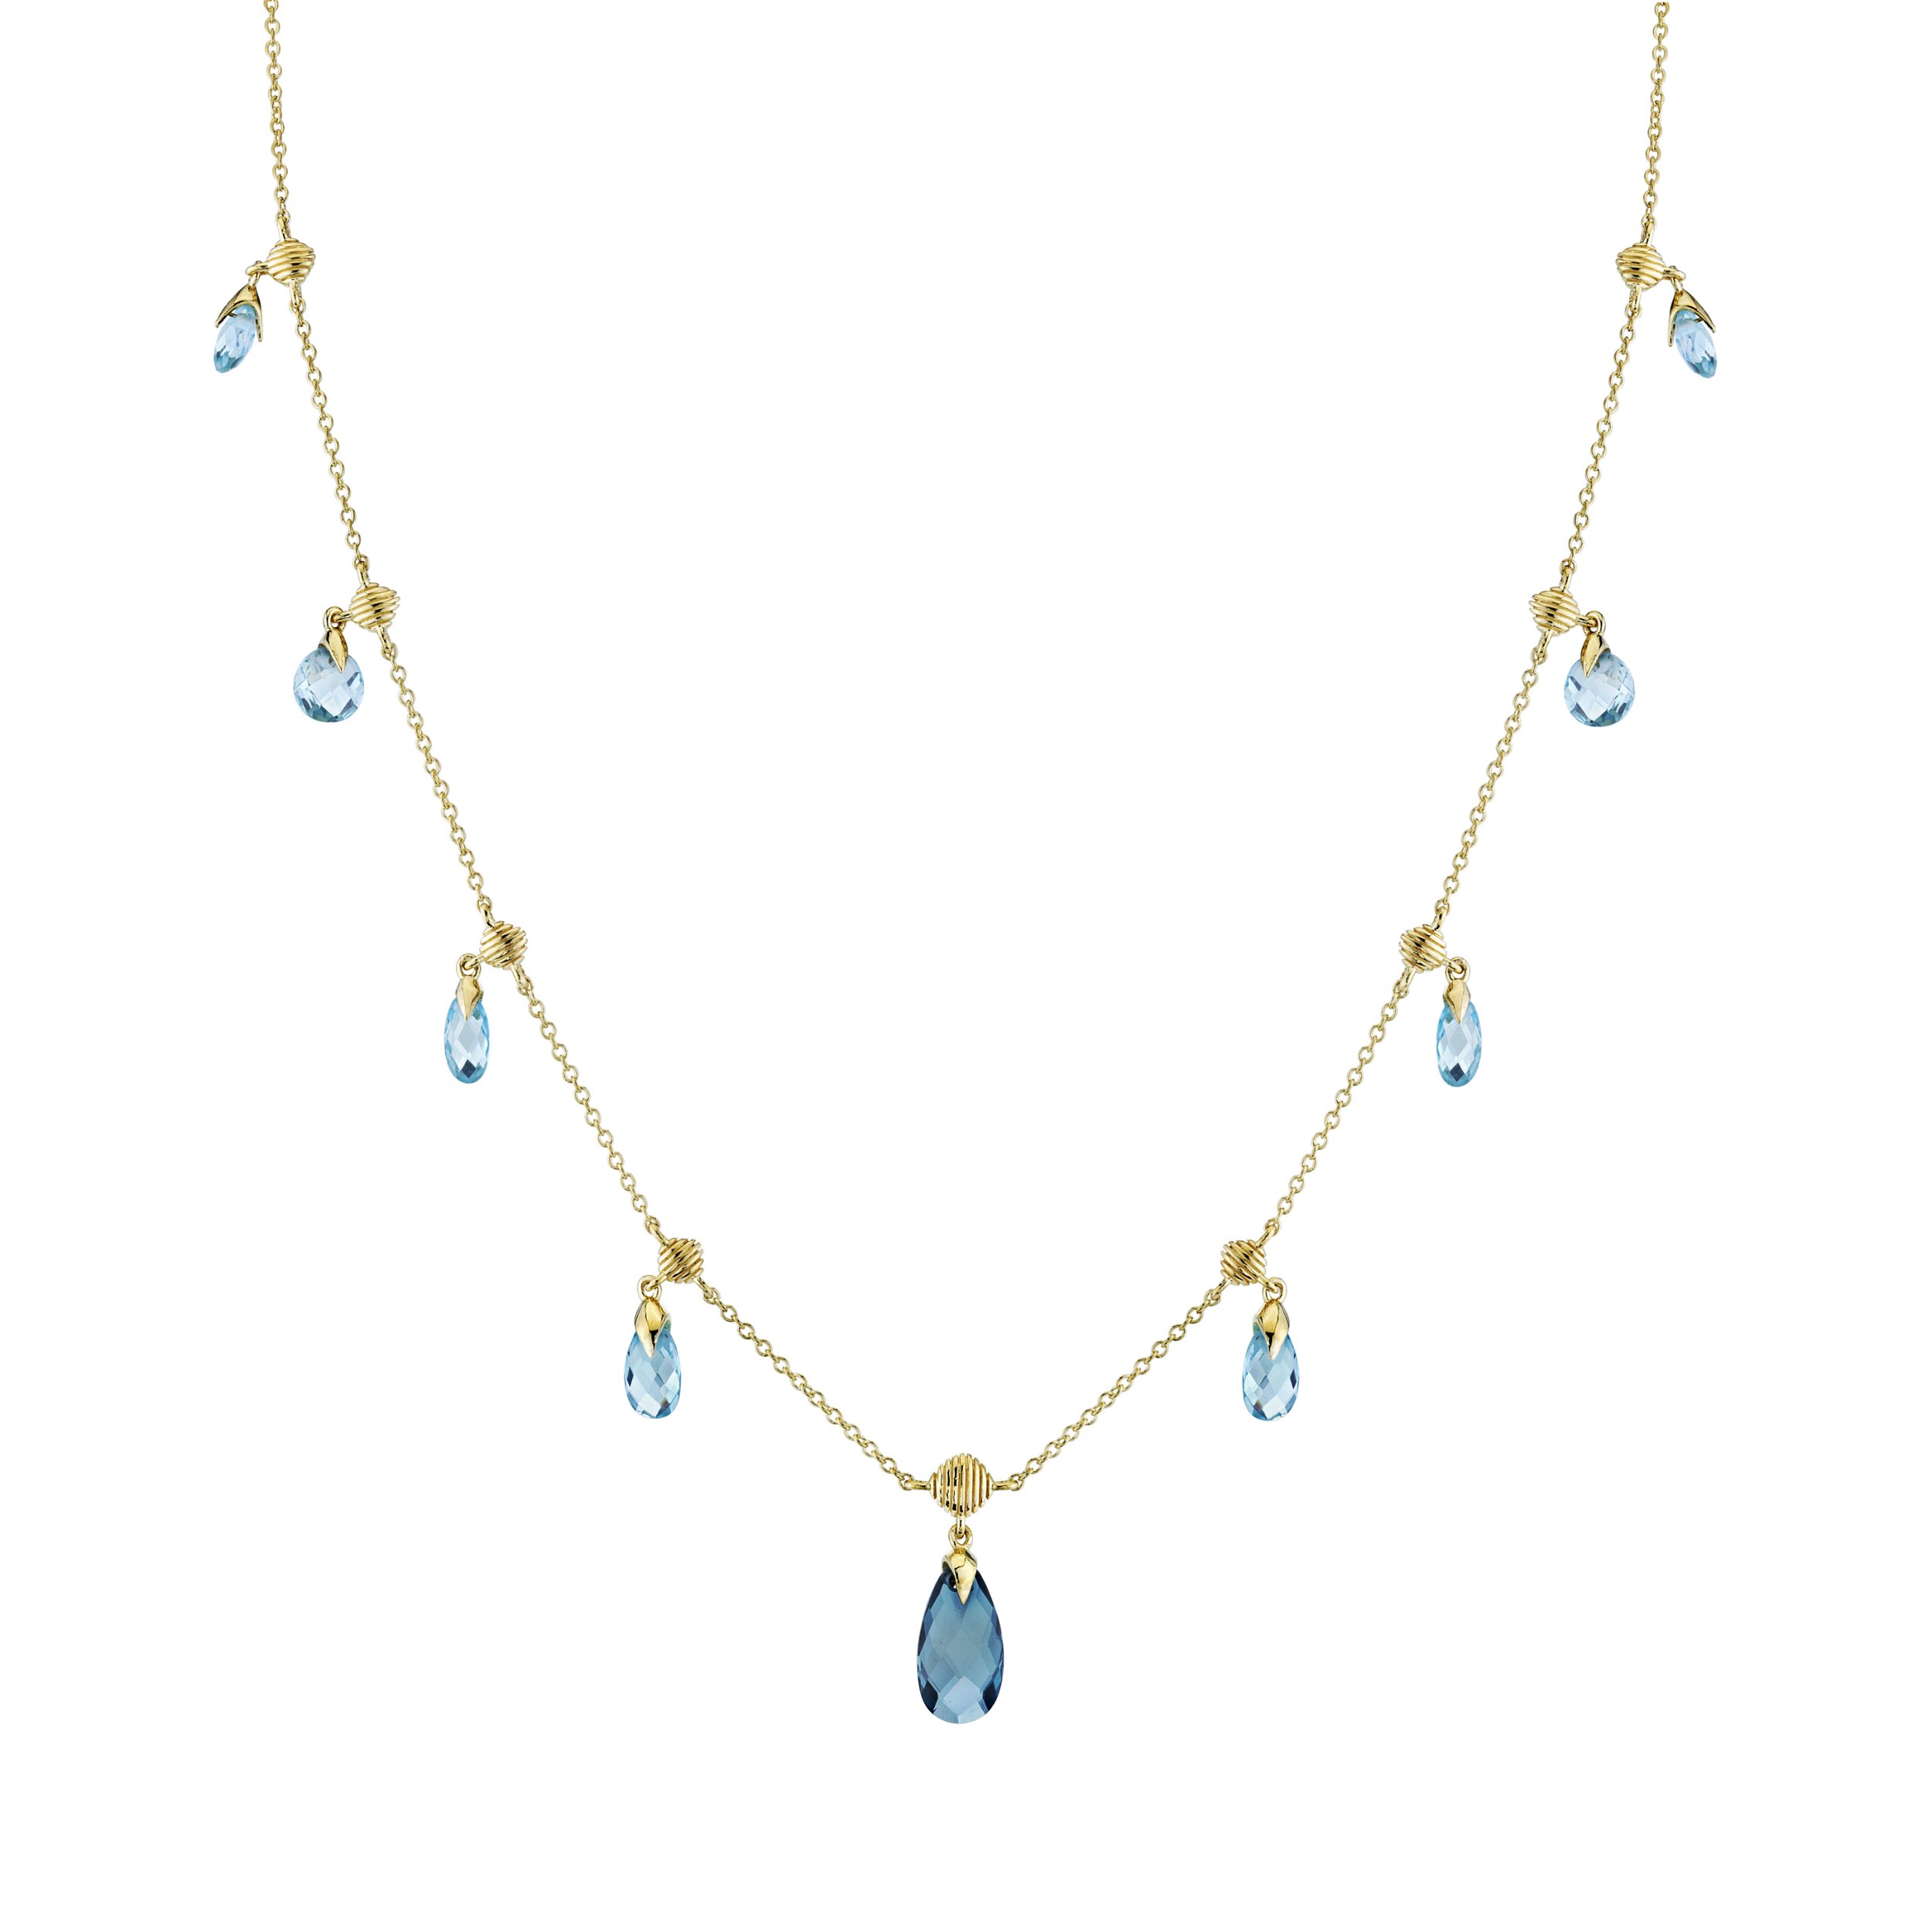 DANGLING OMBRE BLUE TOPAZ CHAIN WITH STRIE DETAILING